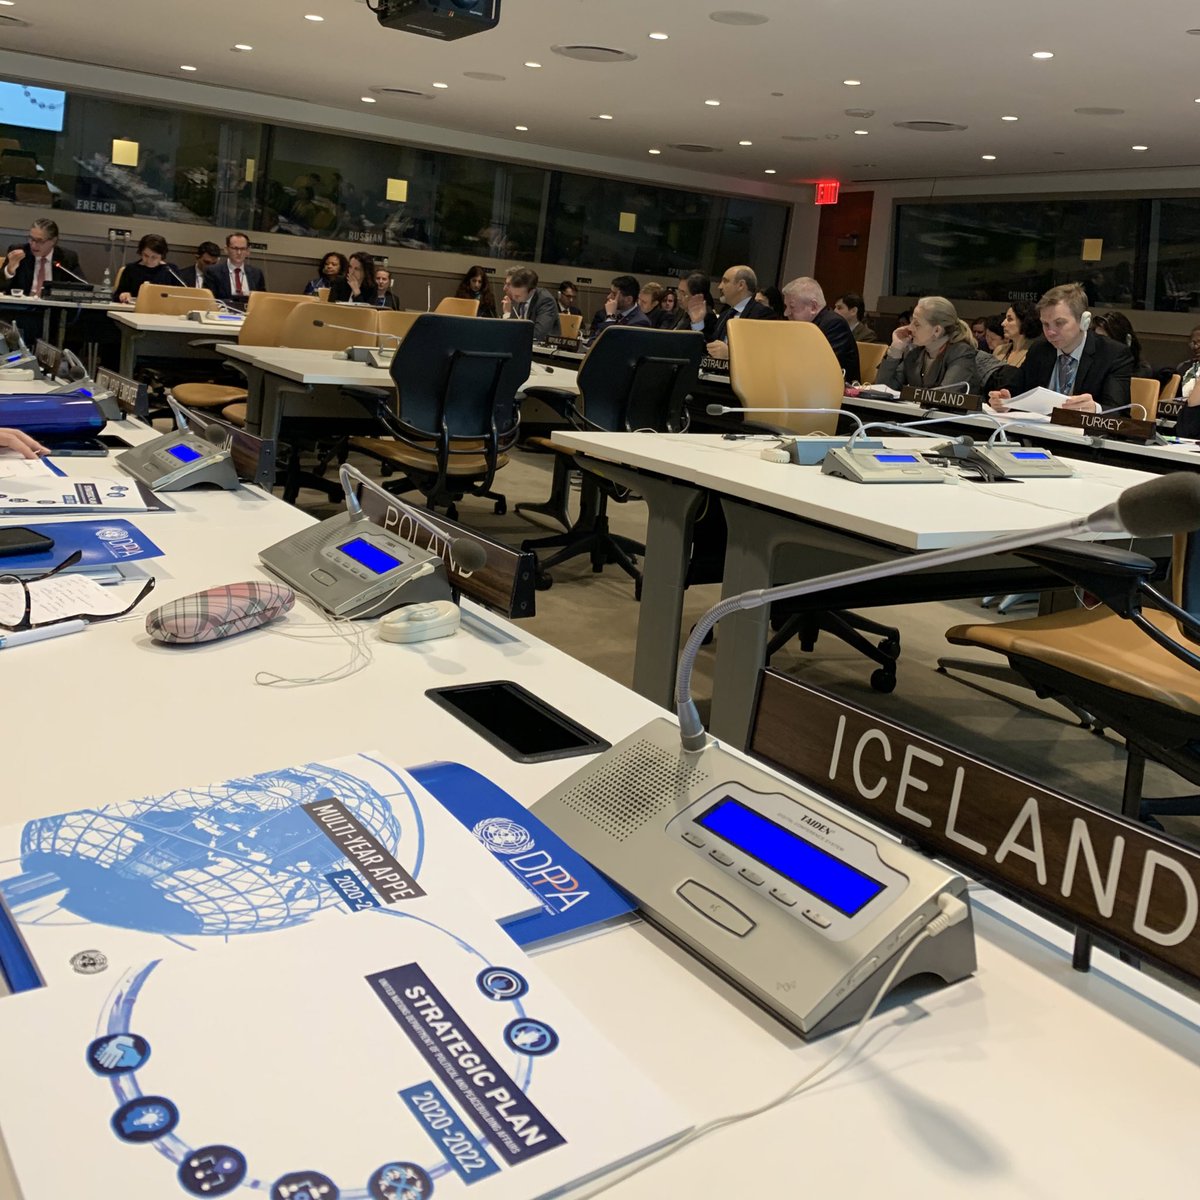 Iceland 🇮🇸 is one of the donor countries that #SupportDPPA. 

We welcome today’s presentation on the strategic plan & vision of the Department of #Political and #Peacebuilding Affairs @UNDPPA at the Annual Donor Meeting. 🕊